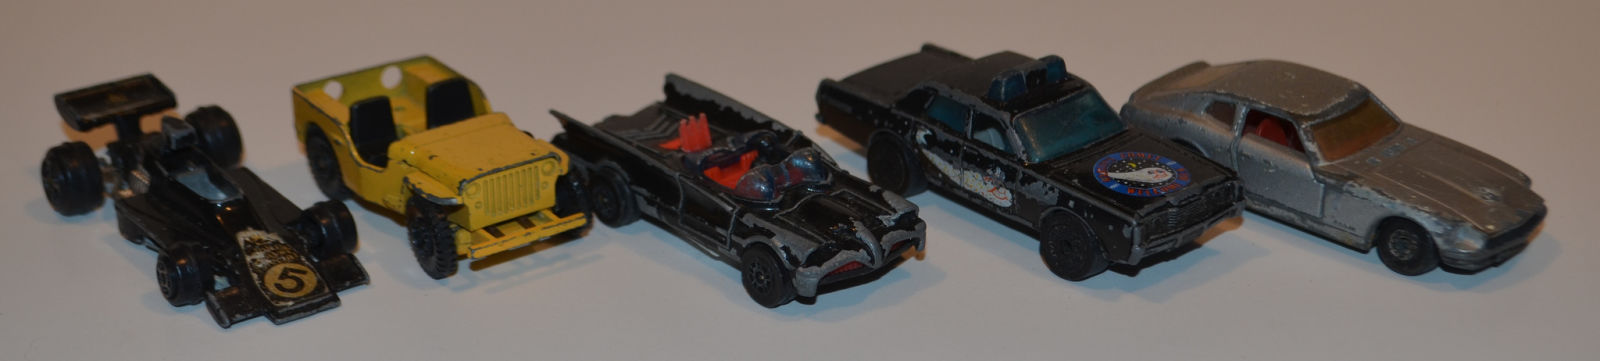 Open wheel car is a John Player special w/ only the front sticker remaining. The black sedan is a Haleys Comet car